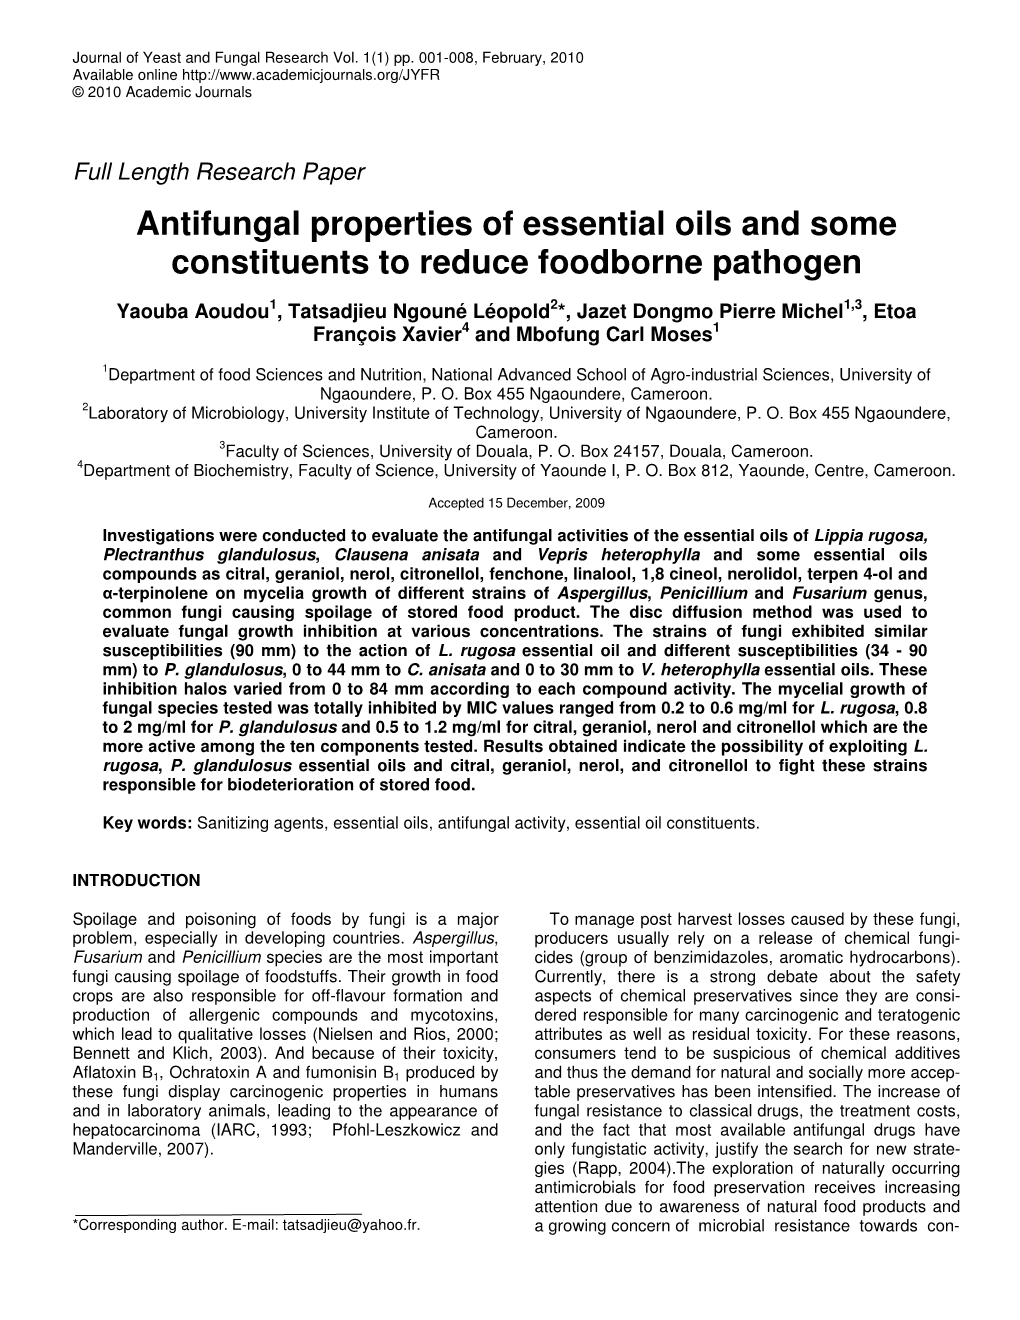 Antifungal Properties of Essential Oils and Some Constituents to Reduce Foodborne Pathogen